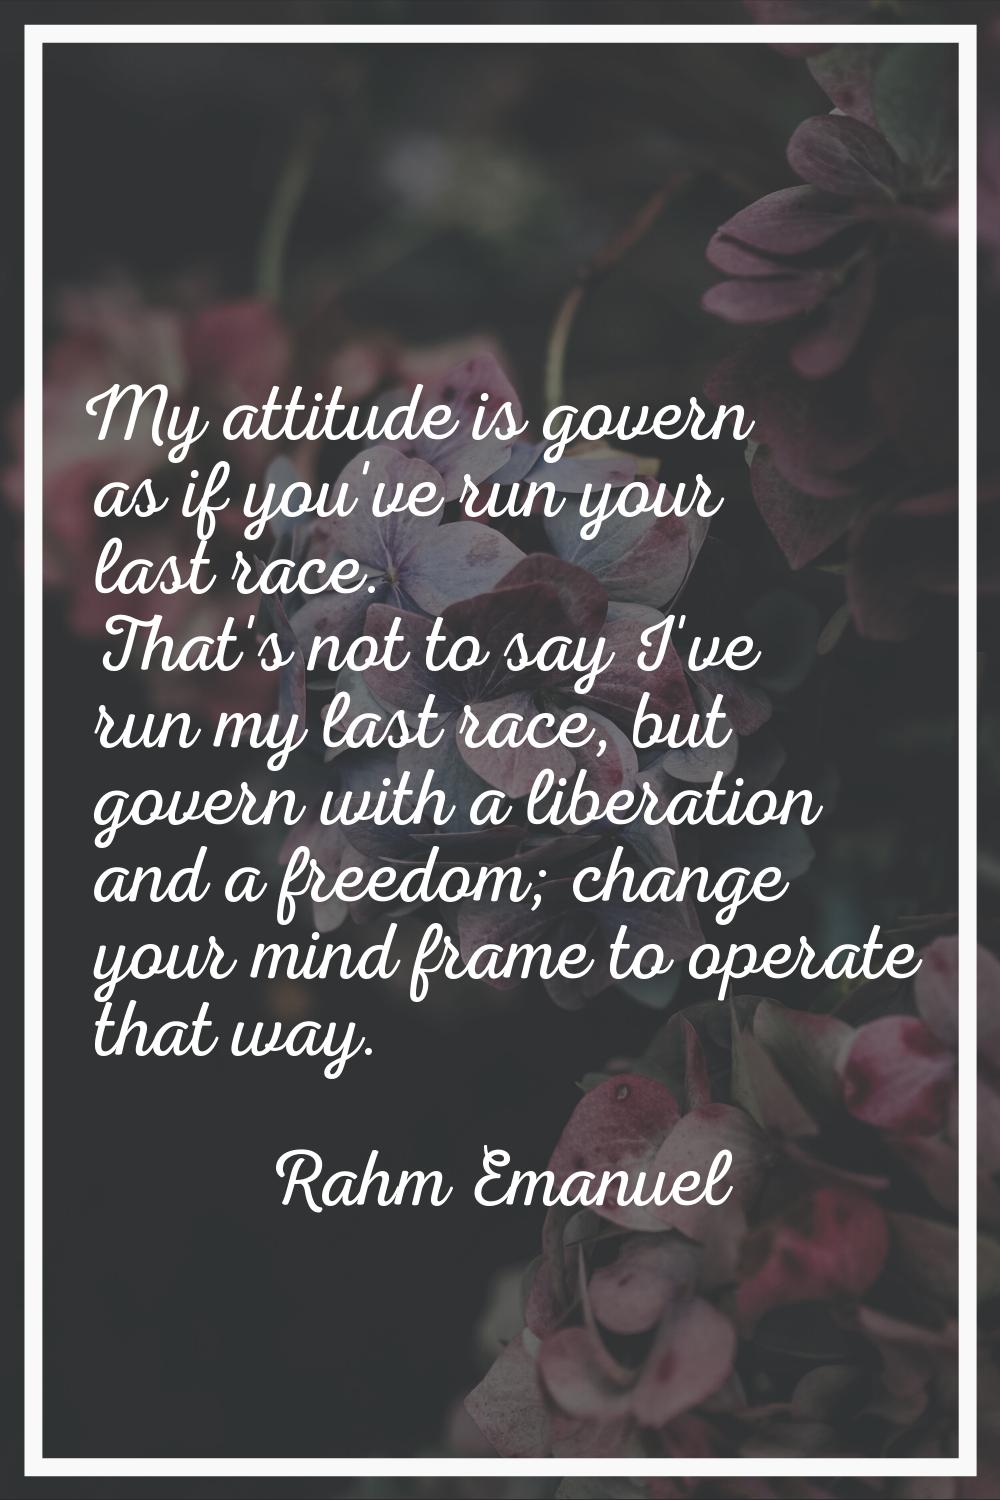 My attitude is govern as if you've run your last race. That's not to say I've run my last race, but